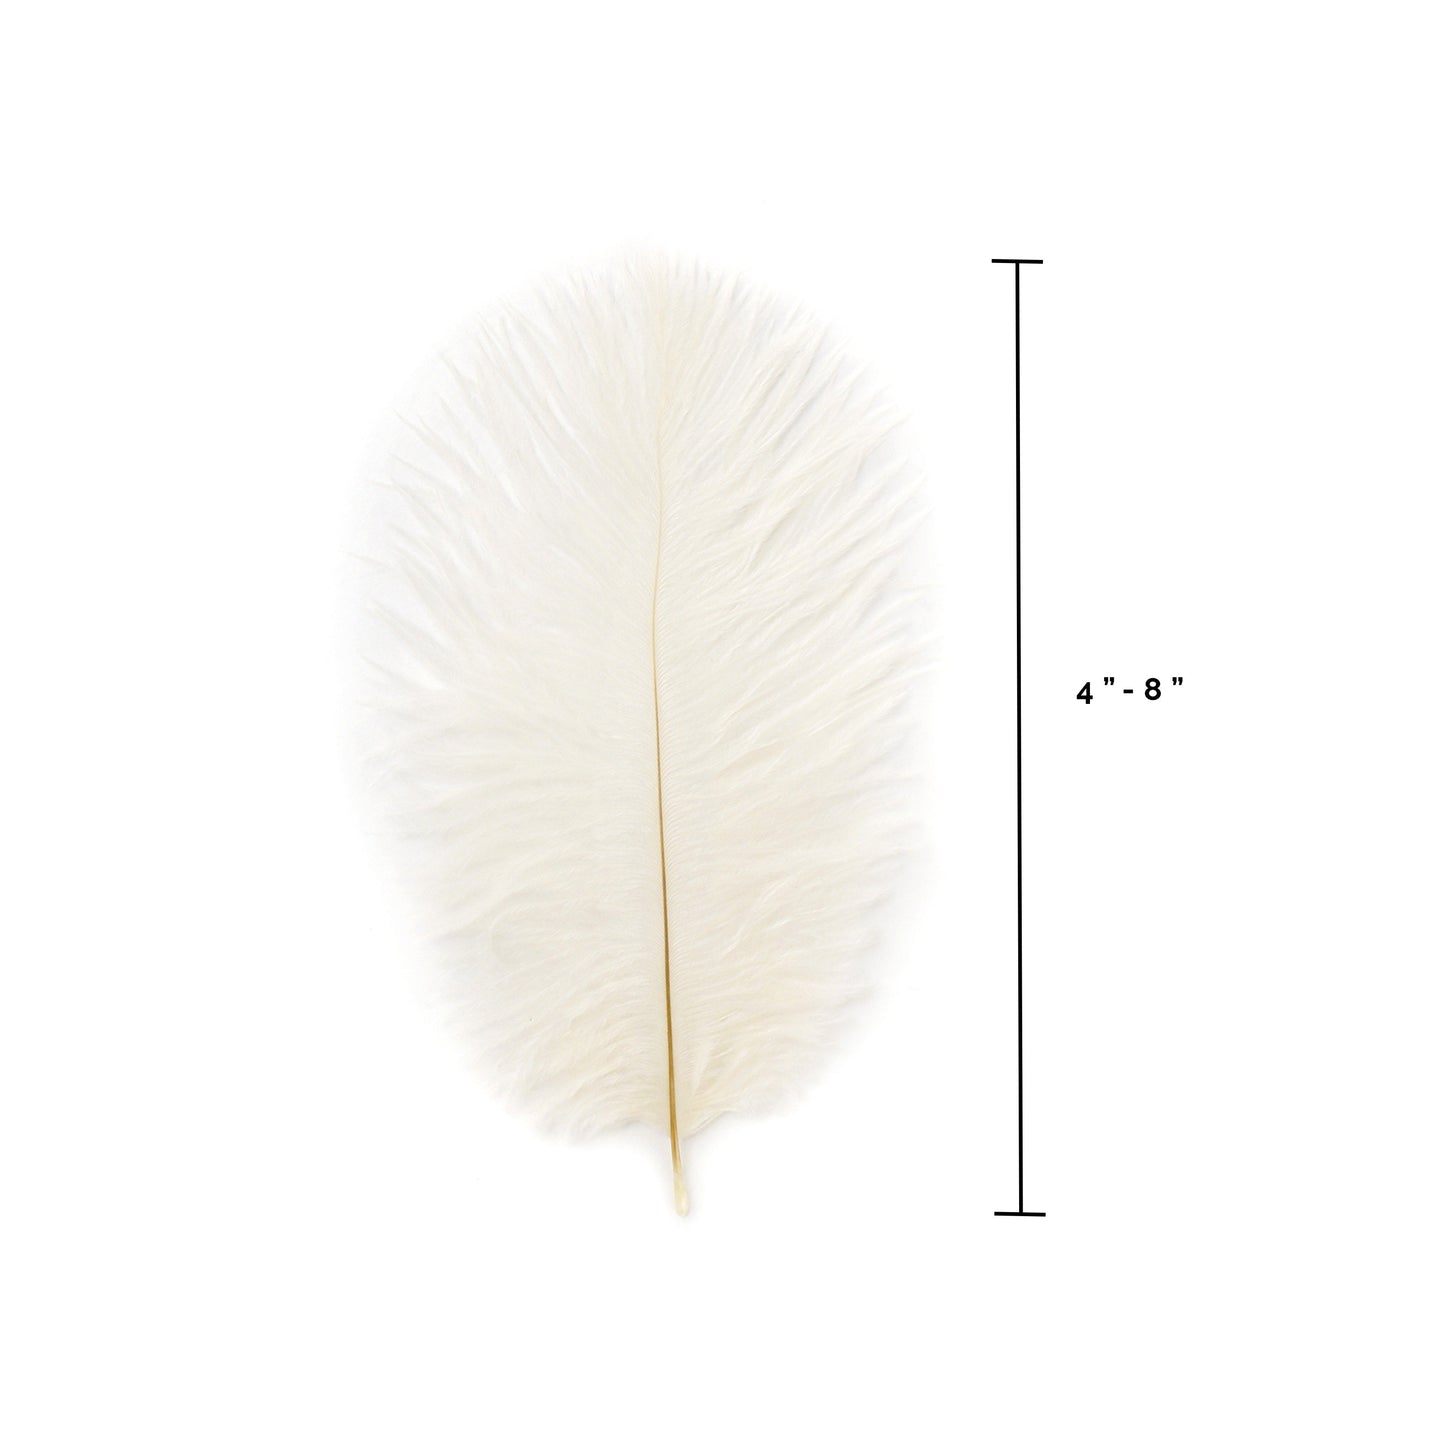 Ostrich Feathers 4-8" Drabs - Ivory